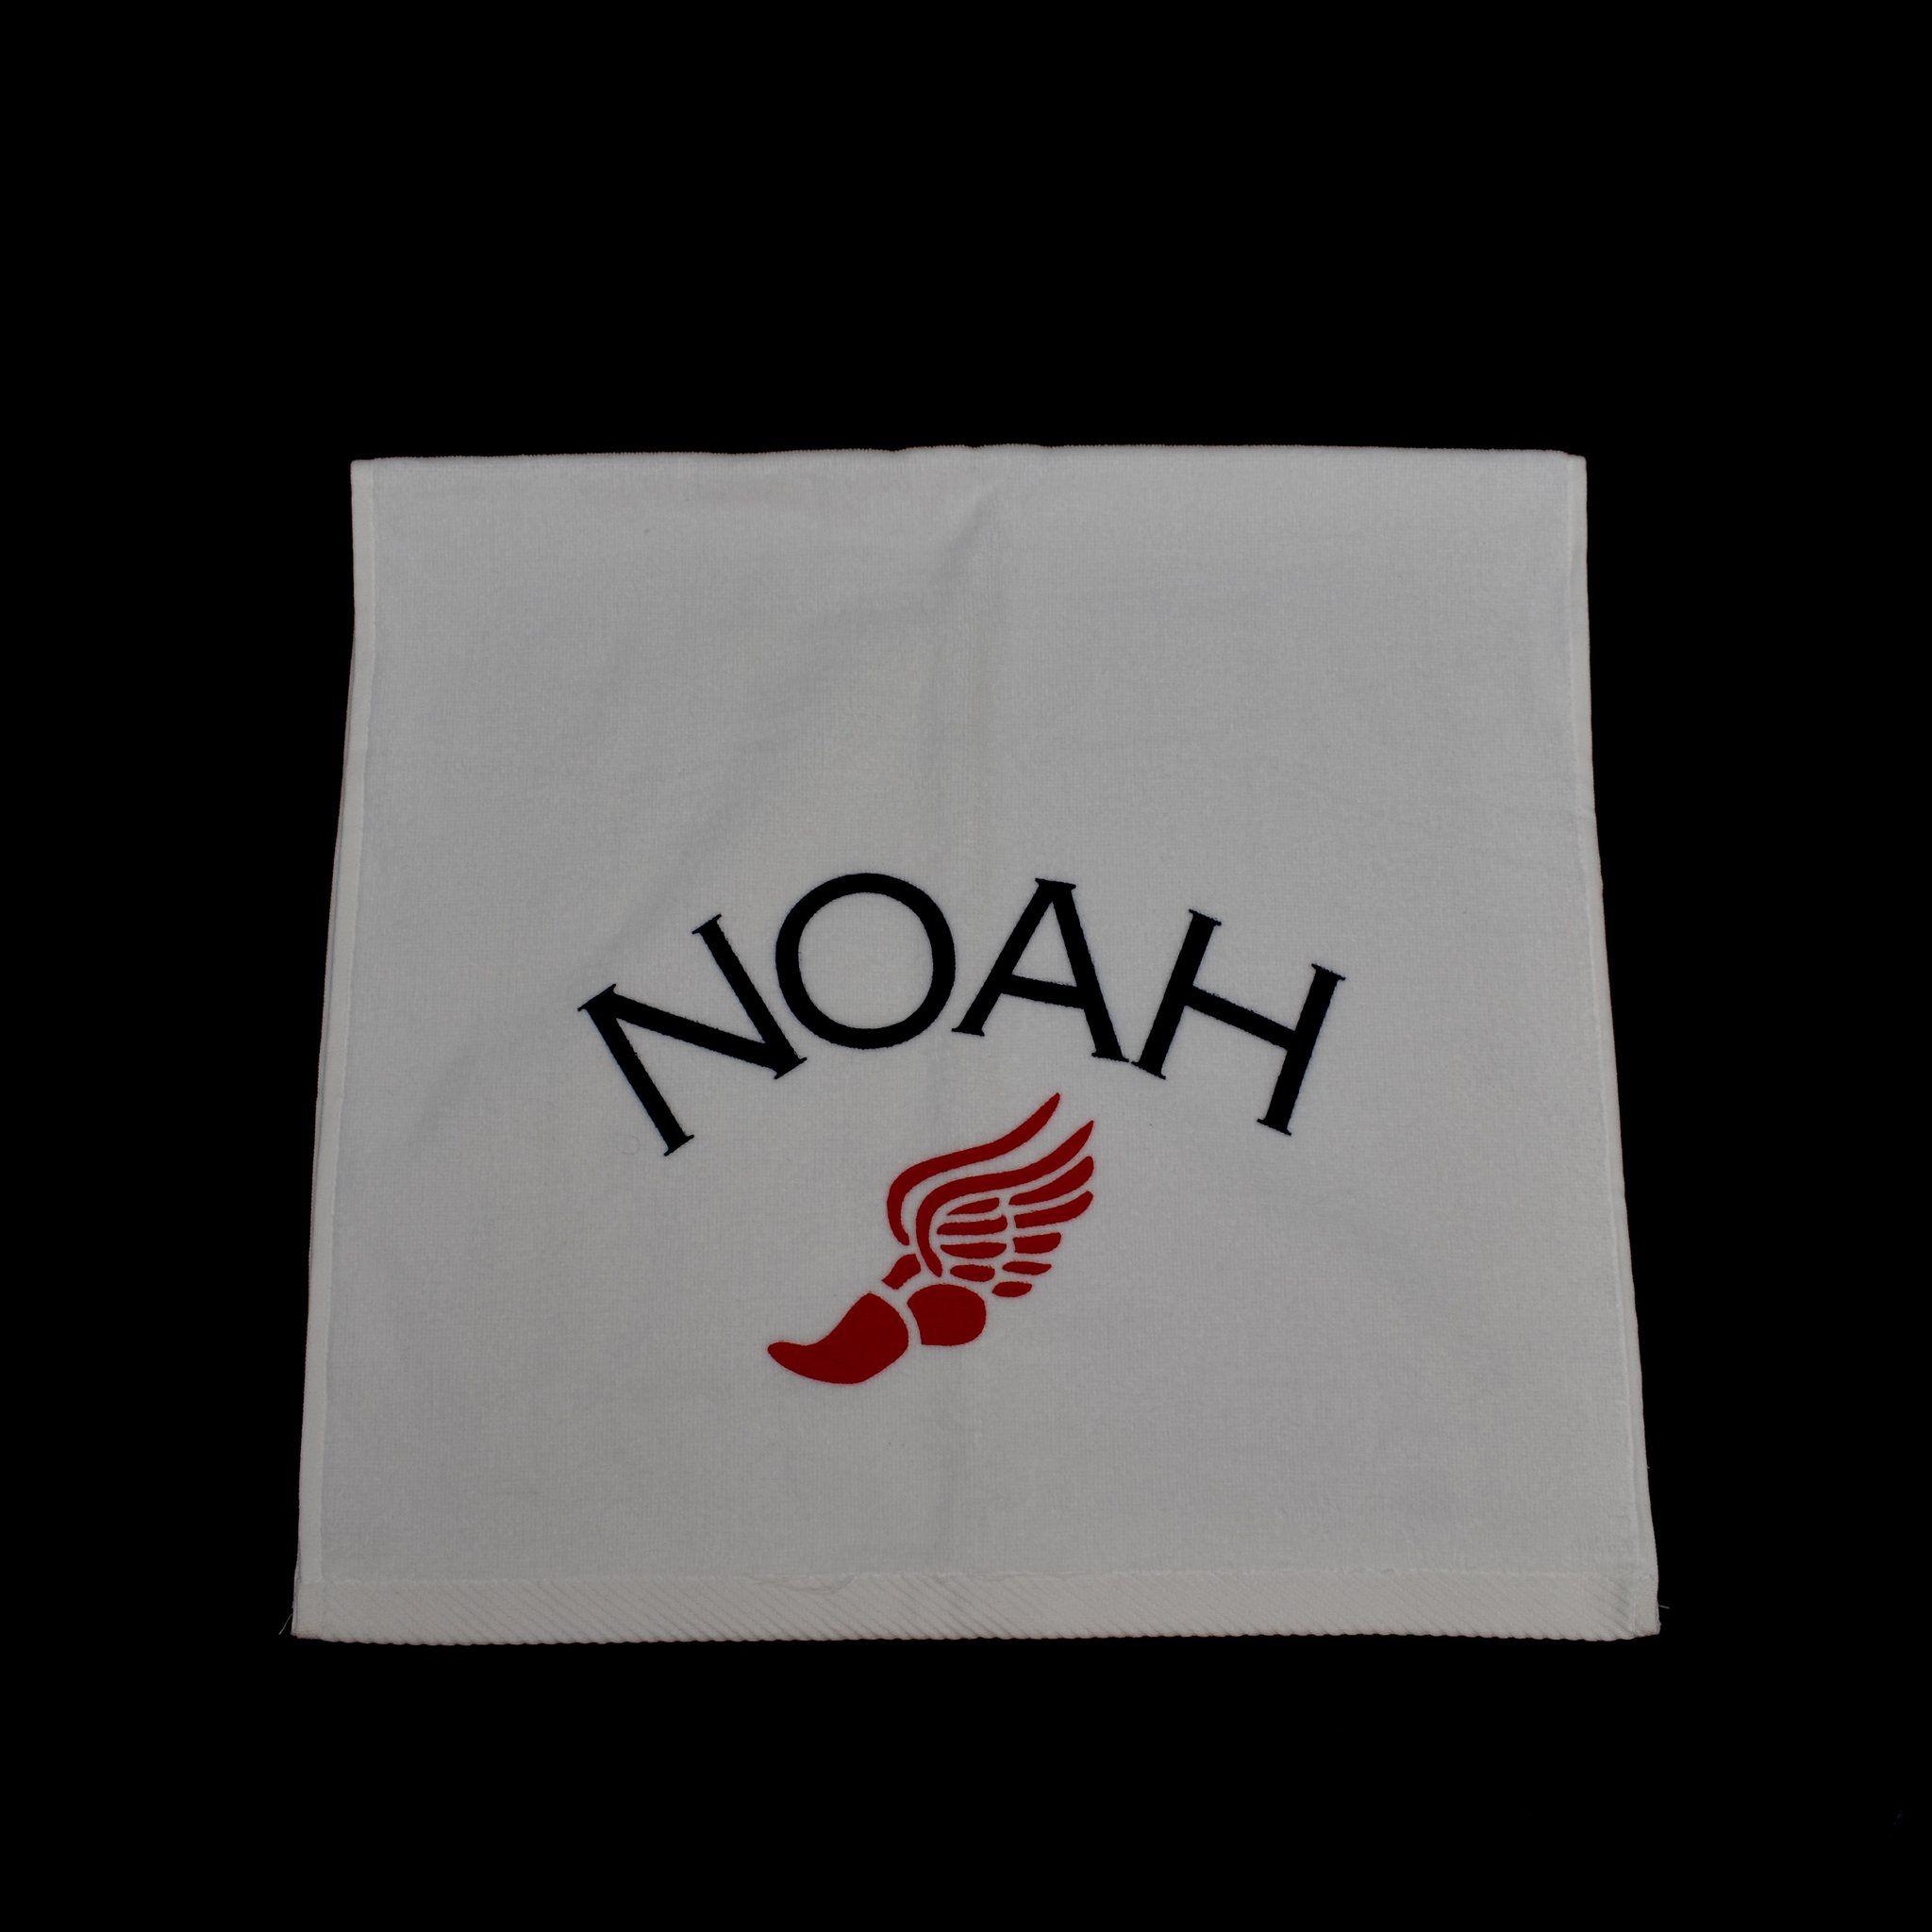 White Winged Foot Logo - Noah Winged Foot Logo Print Cotton Terry Hand Towel